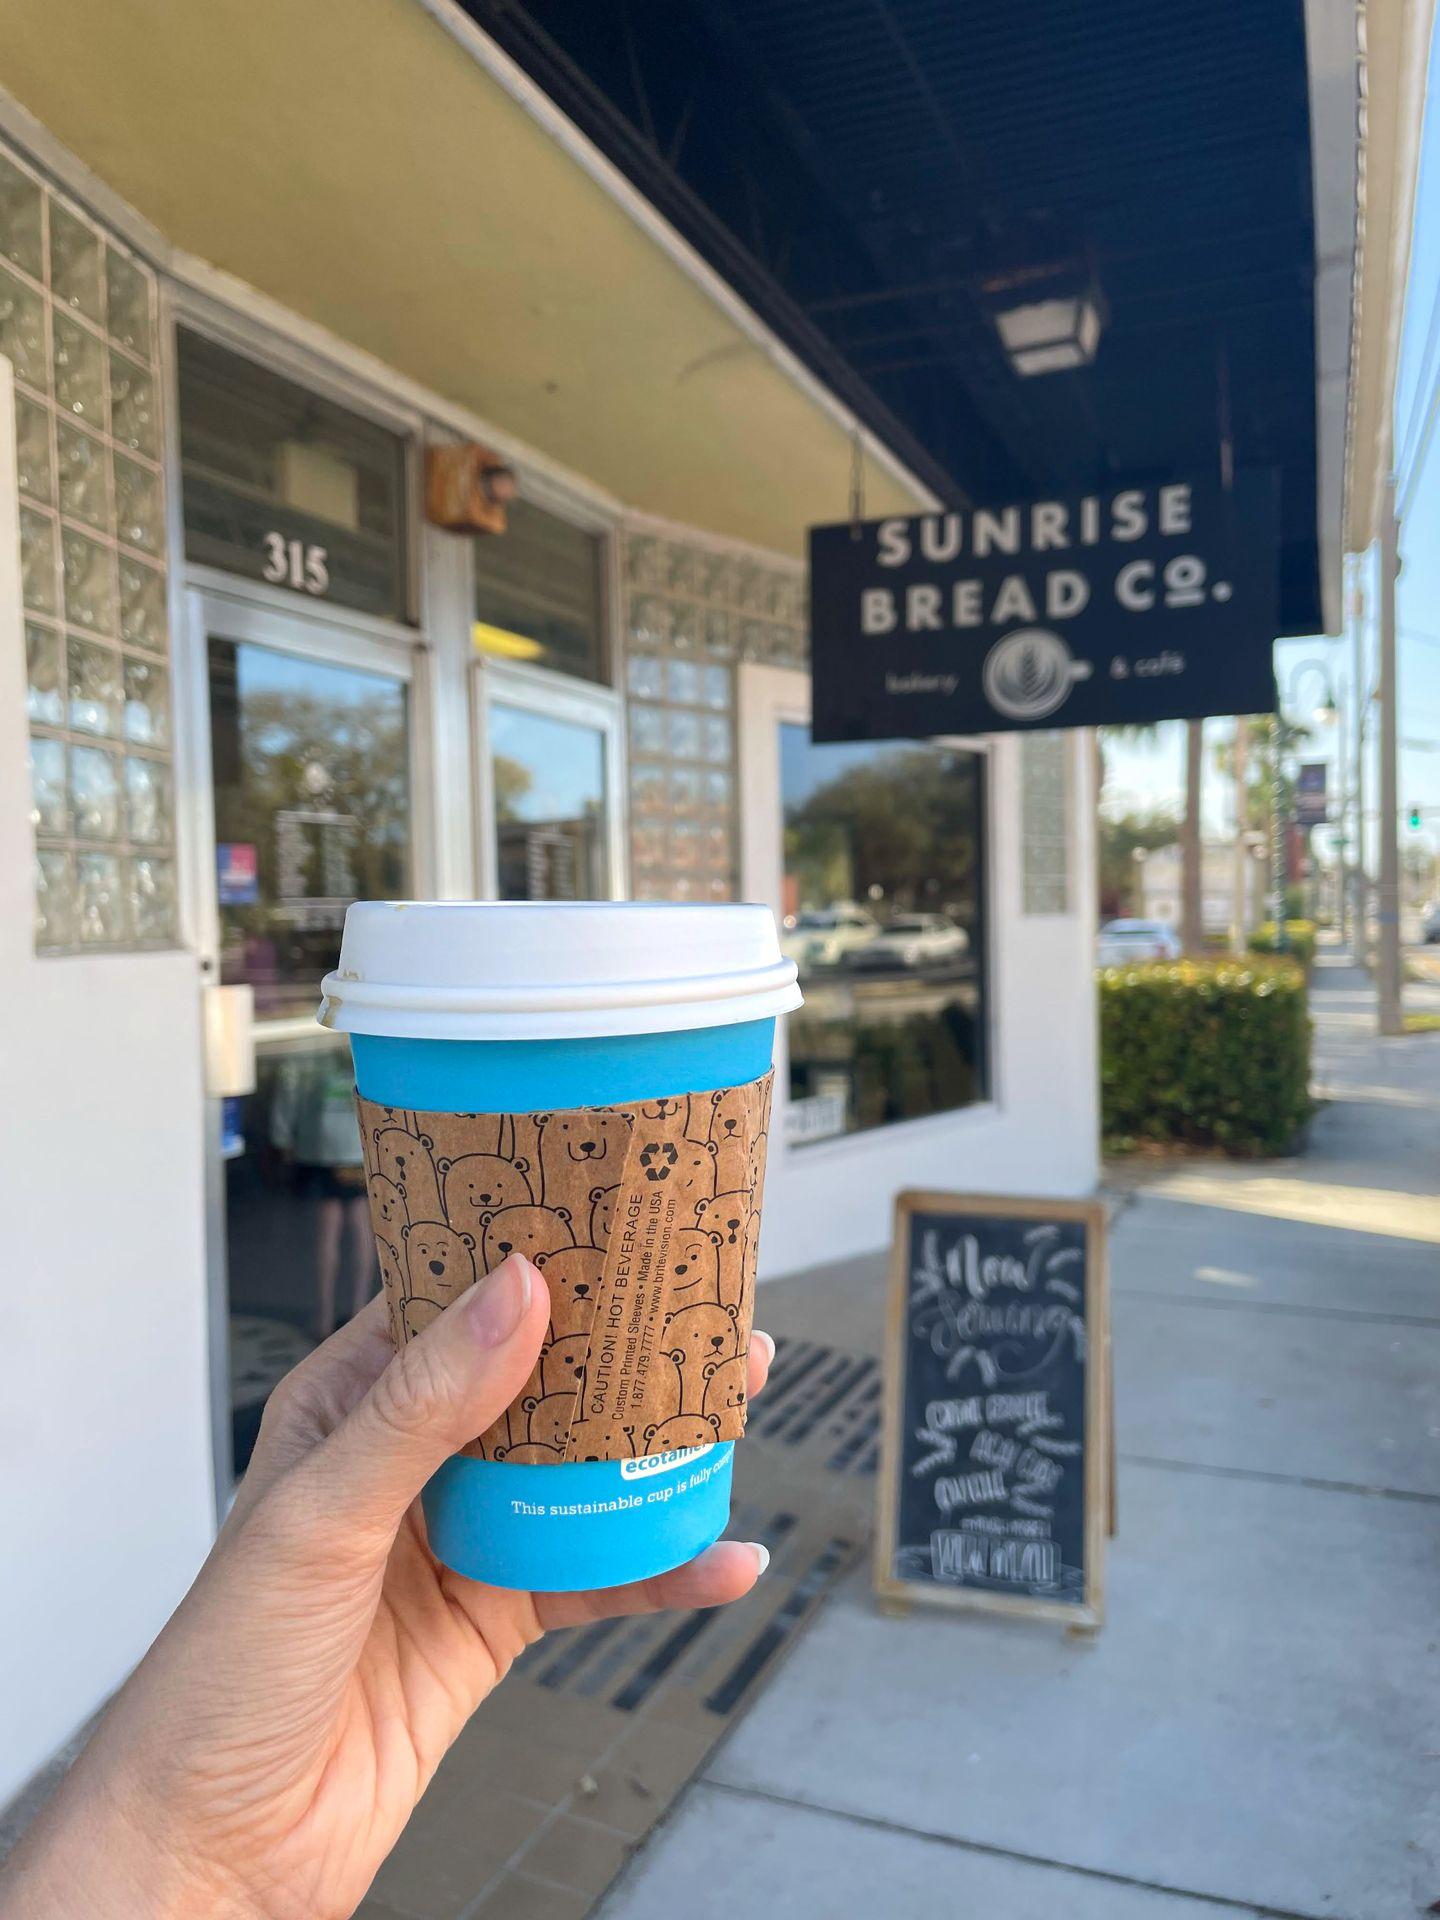 Holding up a blue, paper coffee mug in front of Sunrise Bread Co.